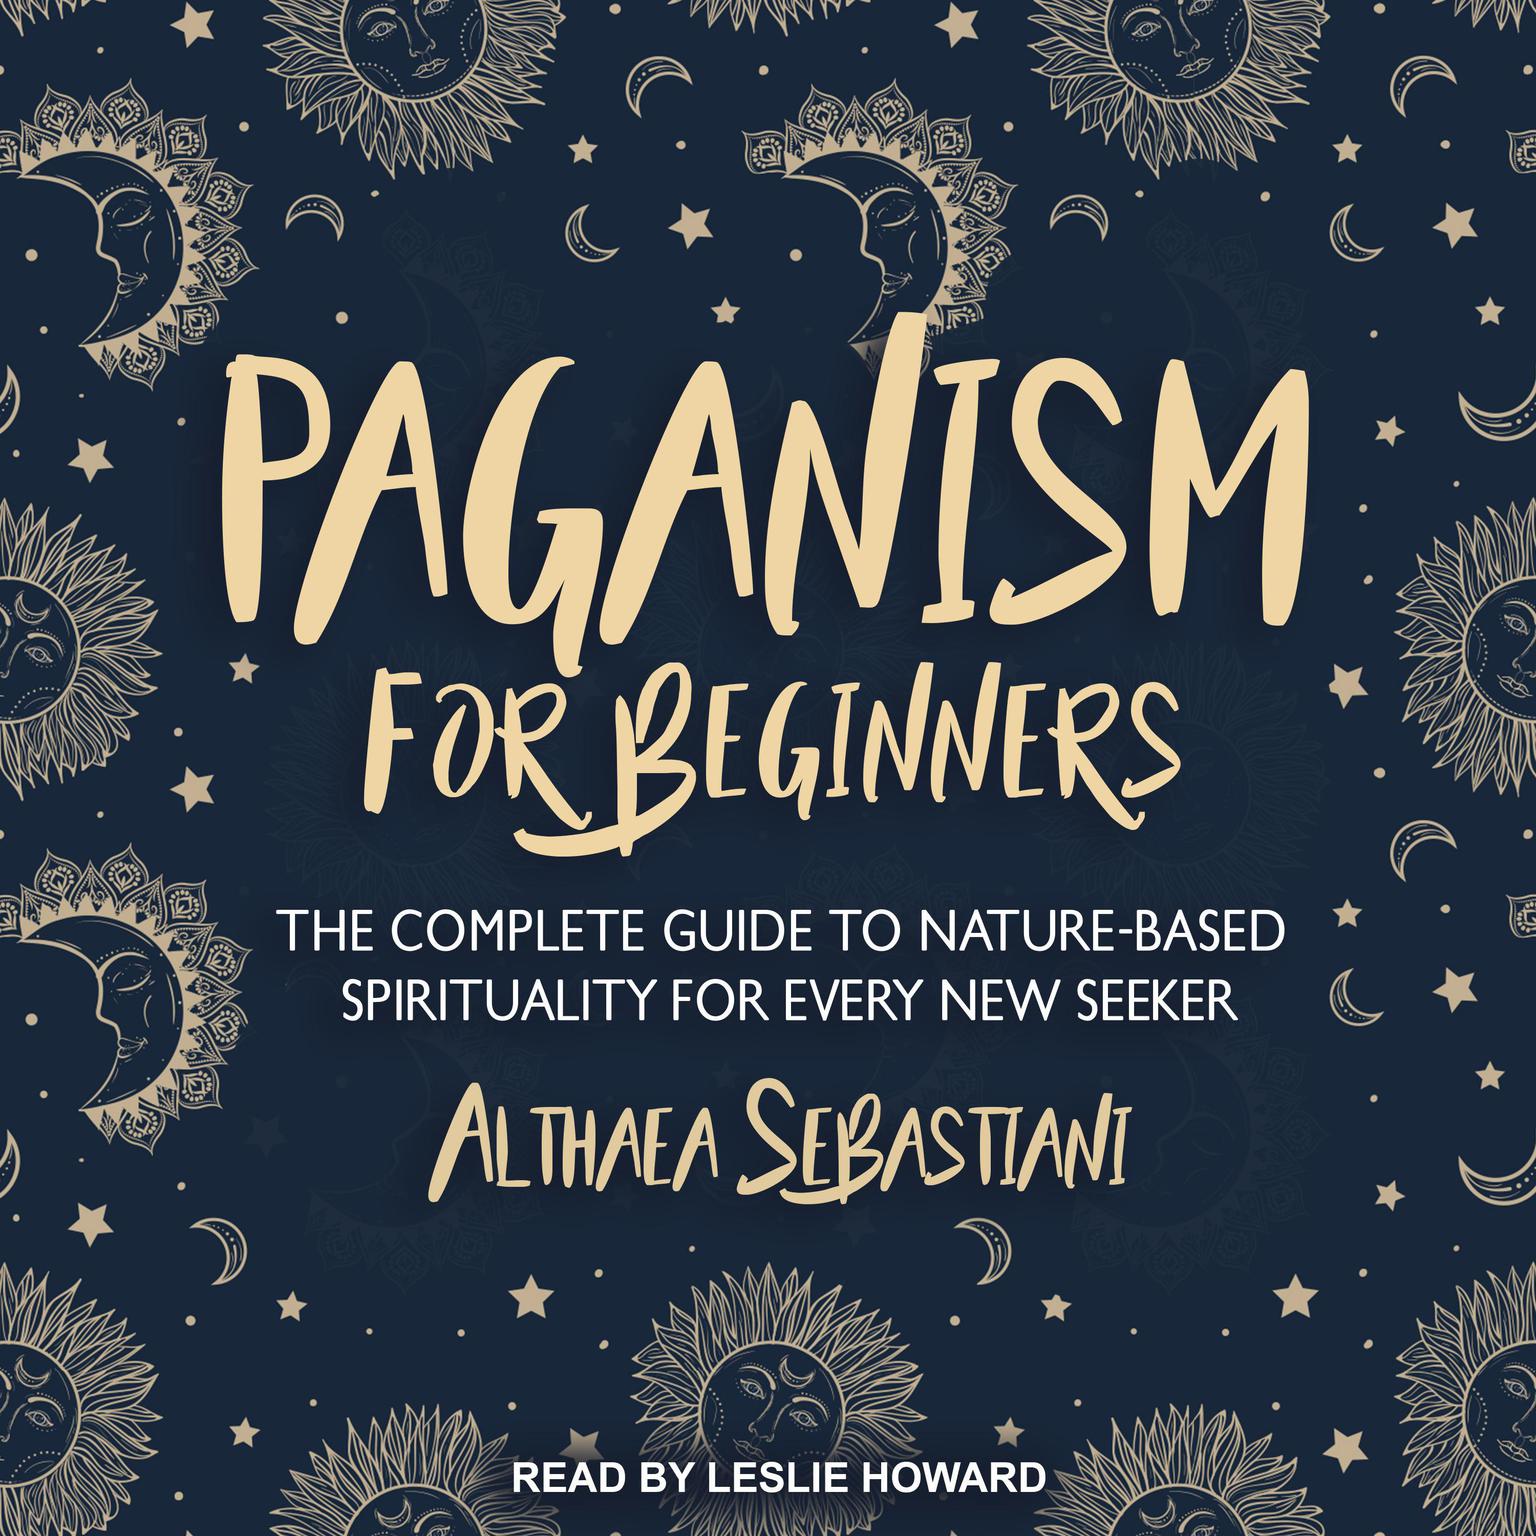 Paganism for Beginners: The Complete Guide to Nature-Based Spirituality for Every New Seeker Audiobook, by Althaea Sebastiani